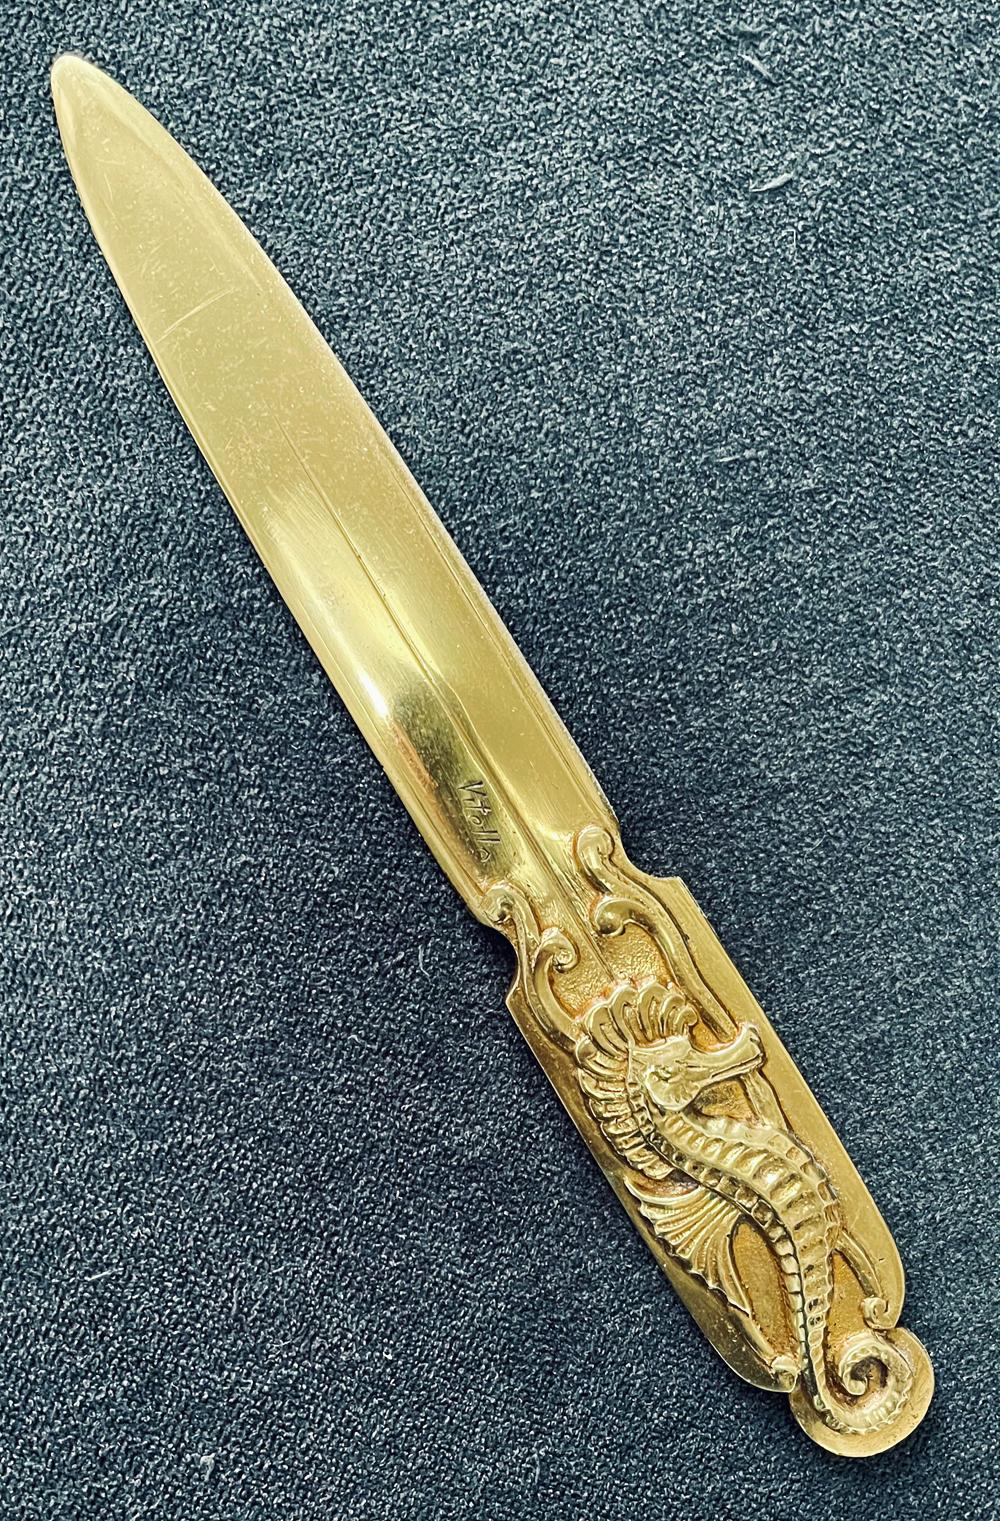 Rare and beautifully crafted, this Art Deco letter opener features a high relief seahorse on its handle and a wide, tapering blade, all in a gold-toned bronze. The sculptor was Vitello, a French artist who specialized in very fine bronze desk items